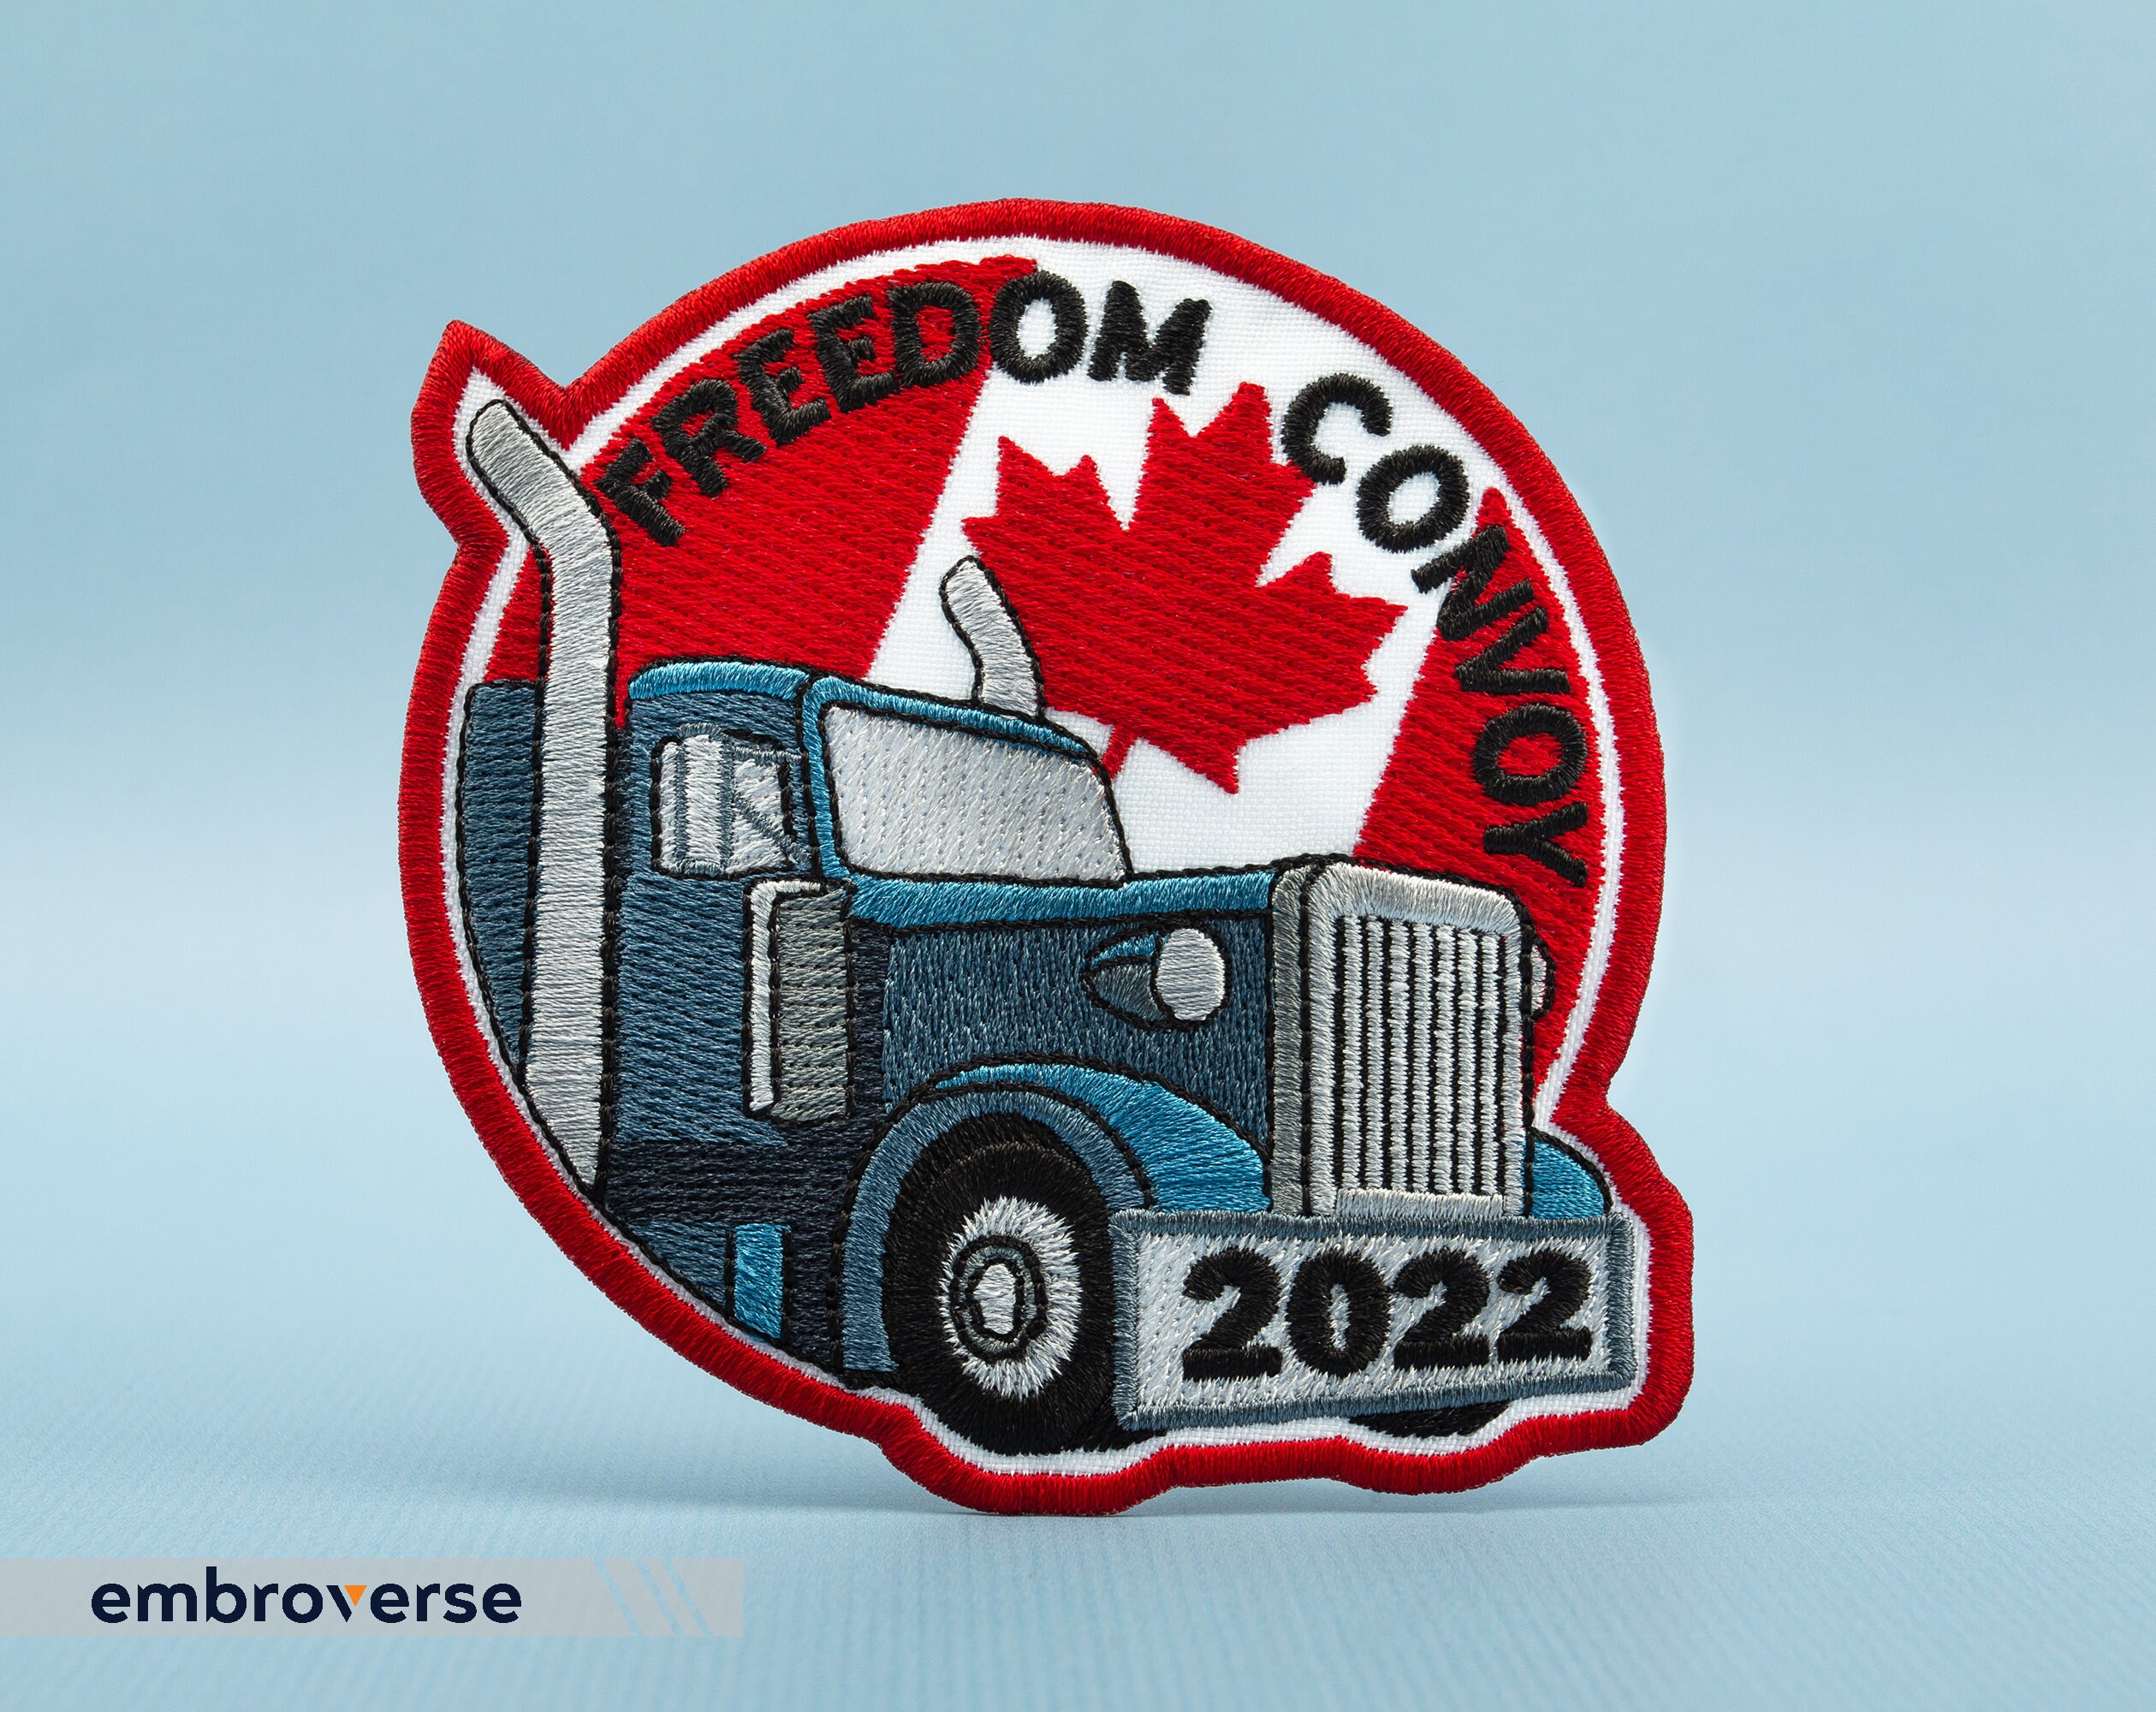 Vintage Style Freedom Convoy Canada Canadian Truckers American Trucker Keep on Truckin Shirt Patch Badge 8cm Hat 3.2 inches Applique